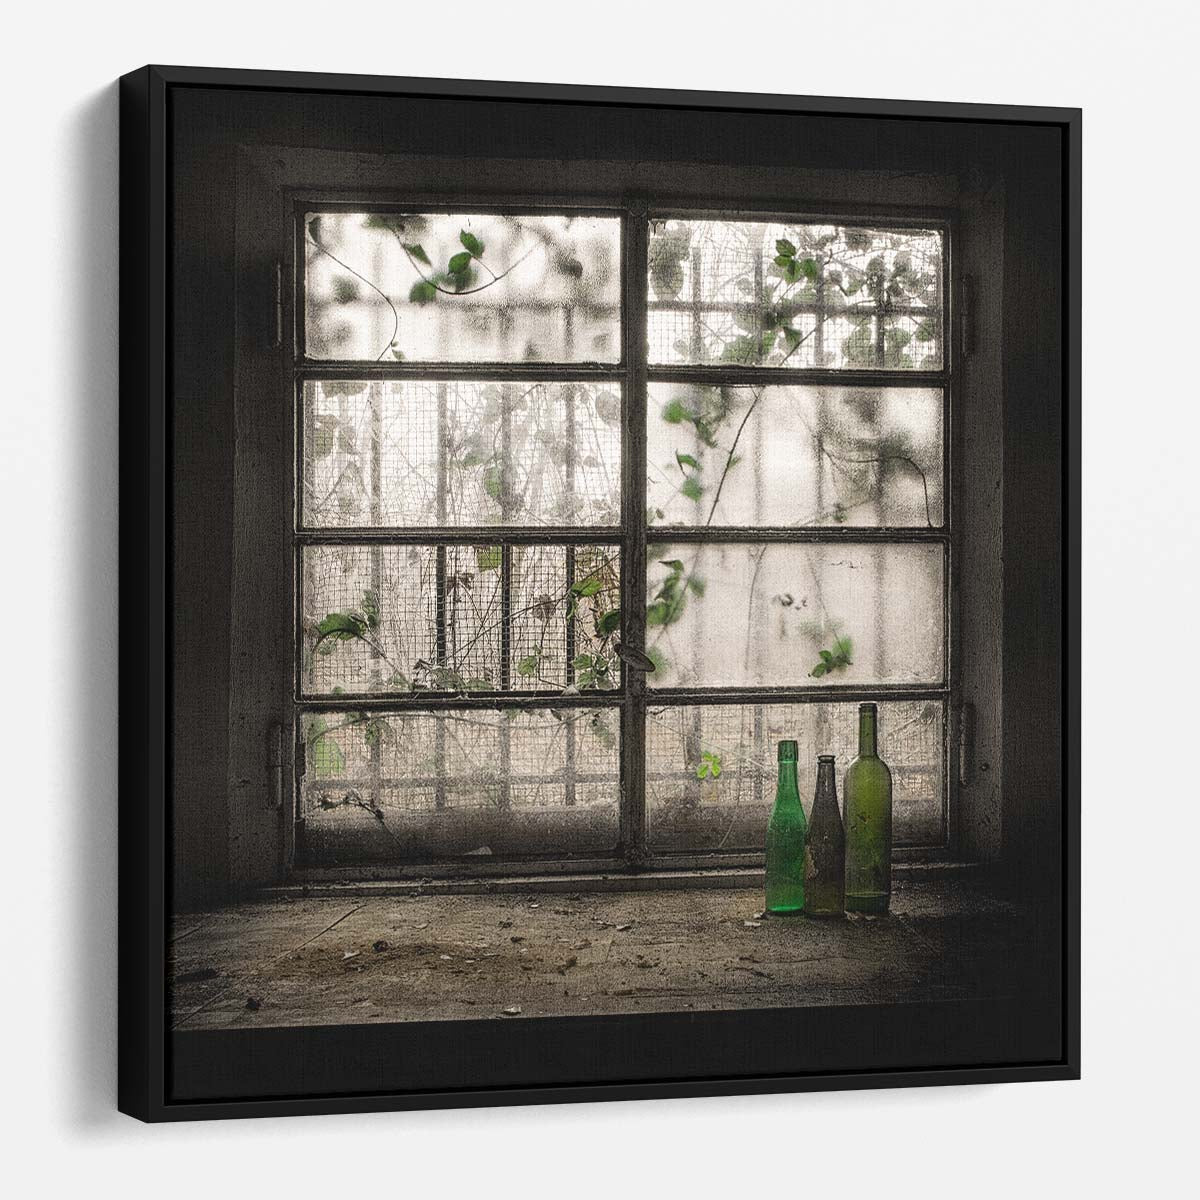 Serene Vintage Italian Window Still Life Photography Wall Art by Luxuriance Designs. Made in USA.